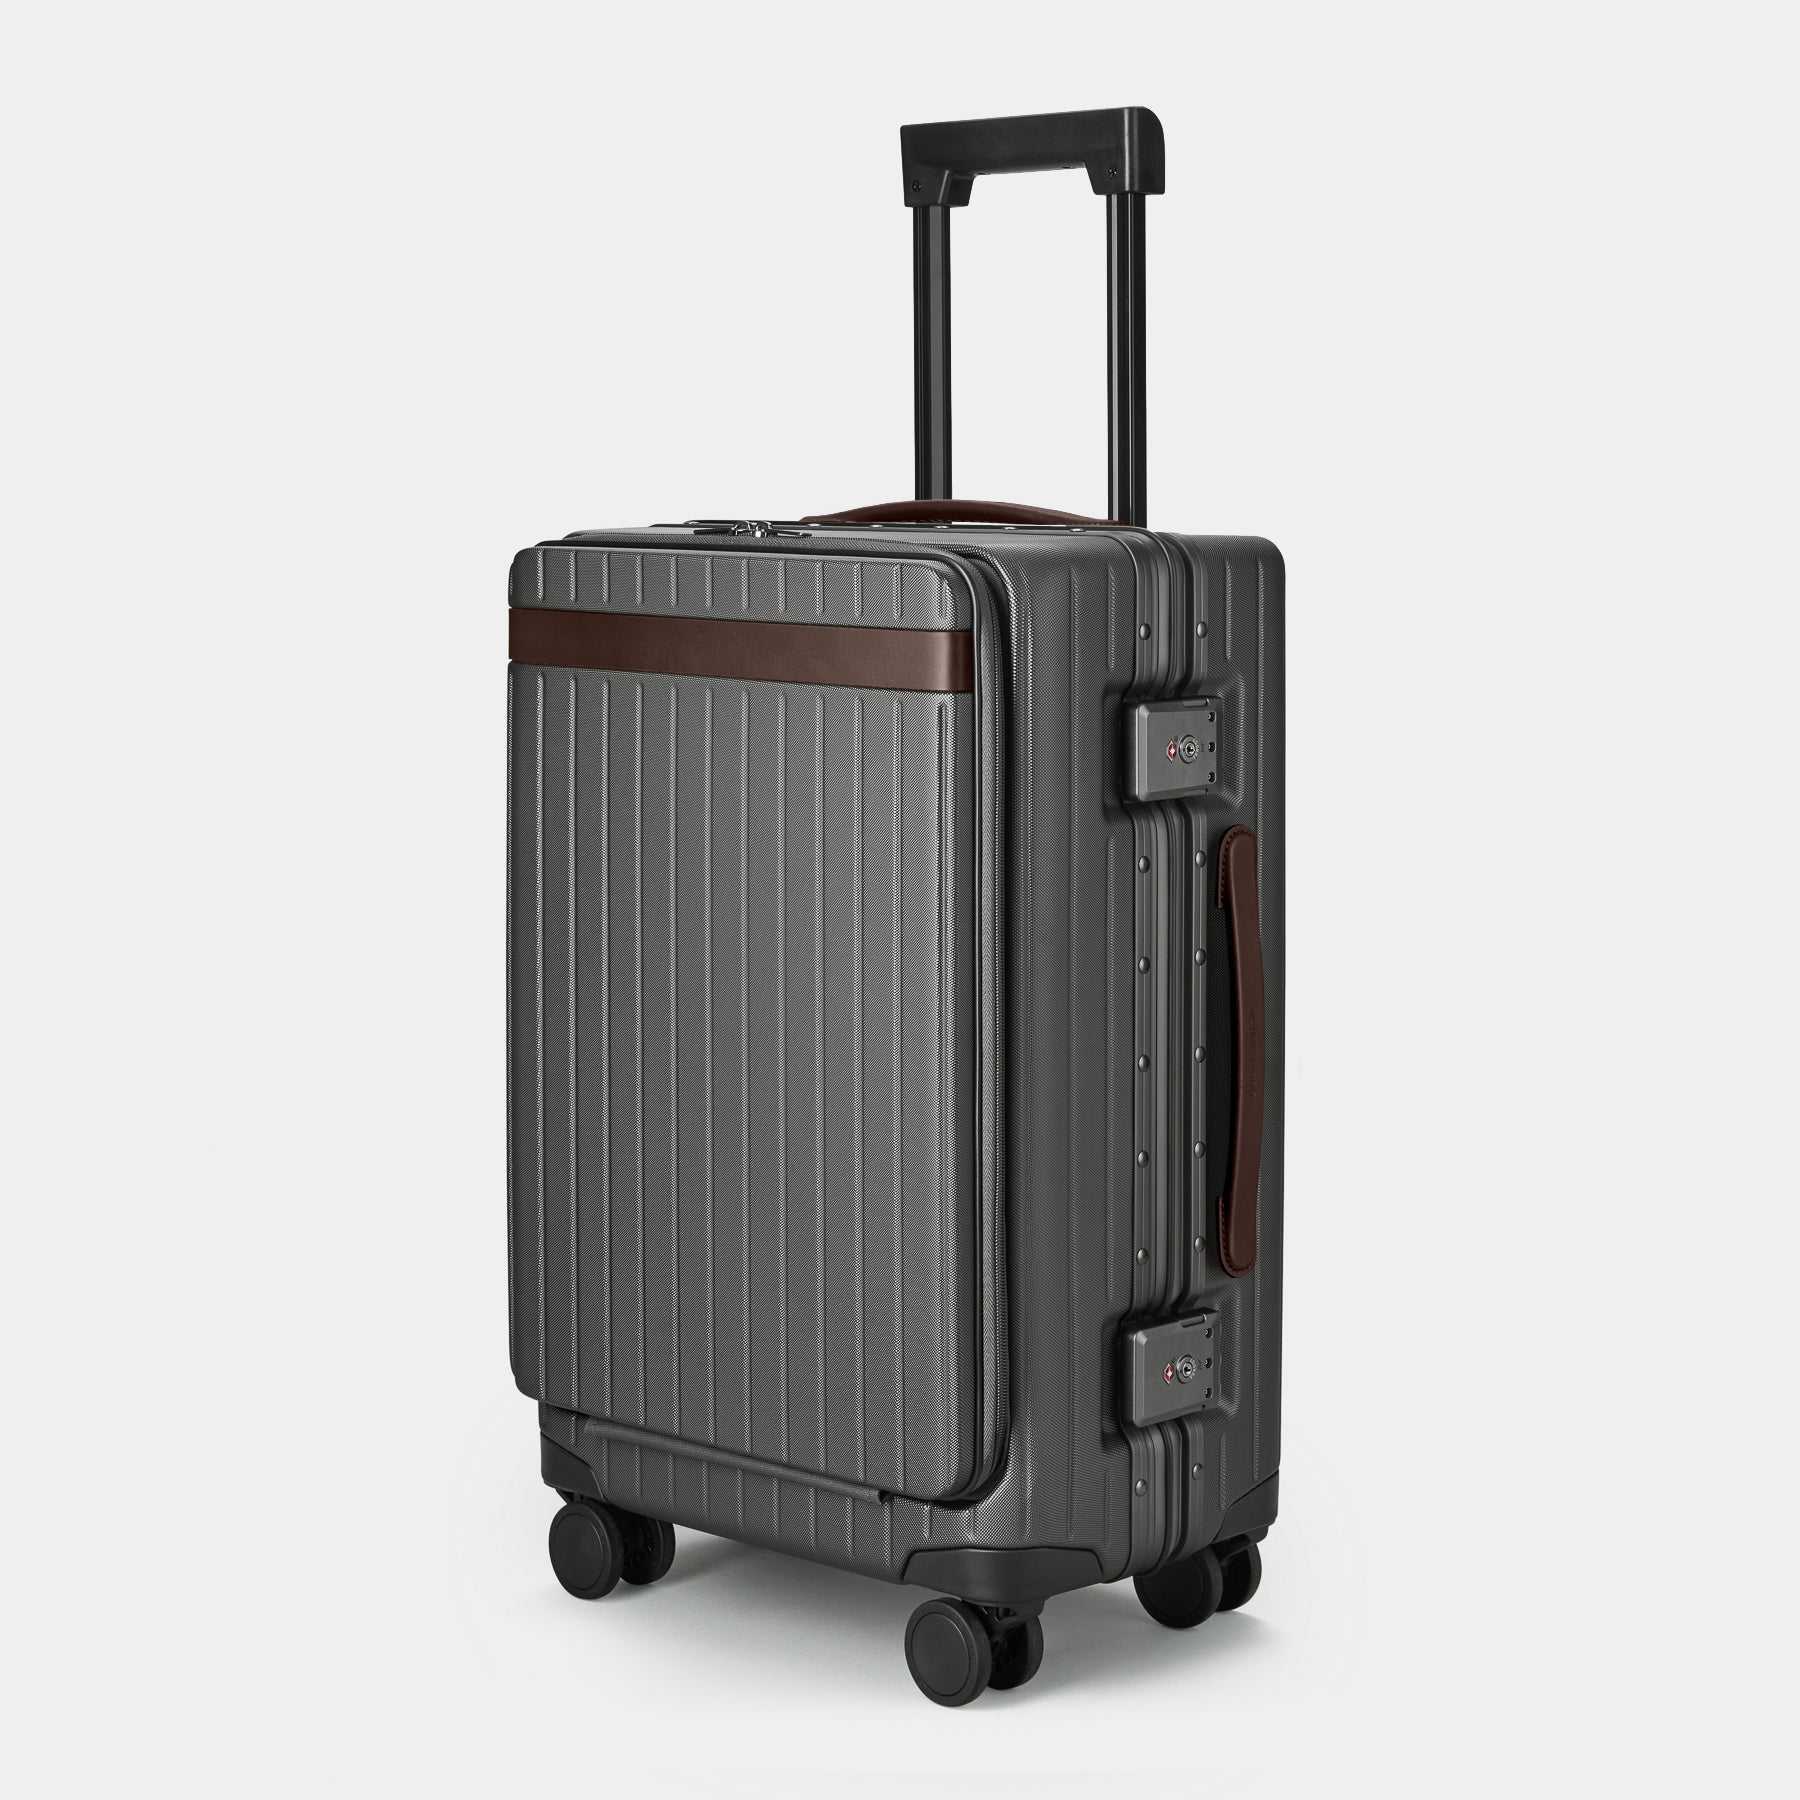 The Carry-on X - Return Chocolate Polycarbonate carry-on suitcase - Fair Condition